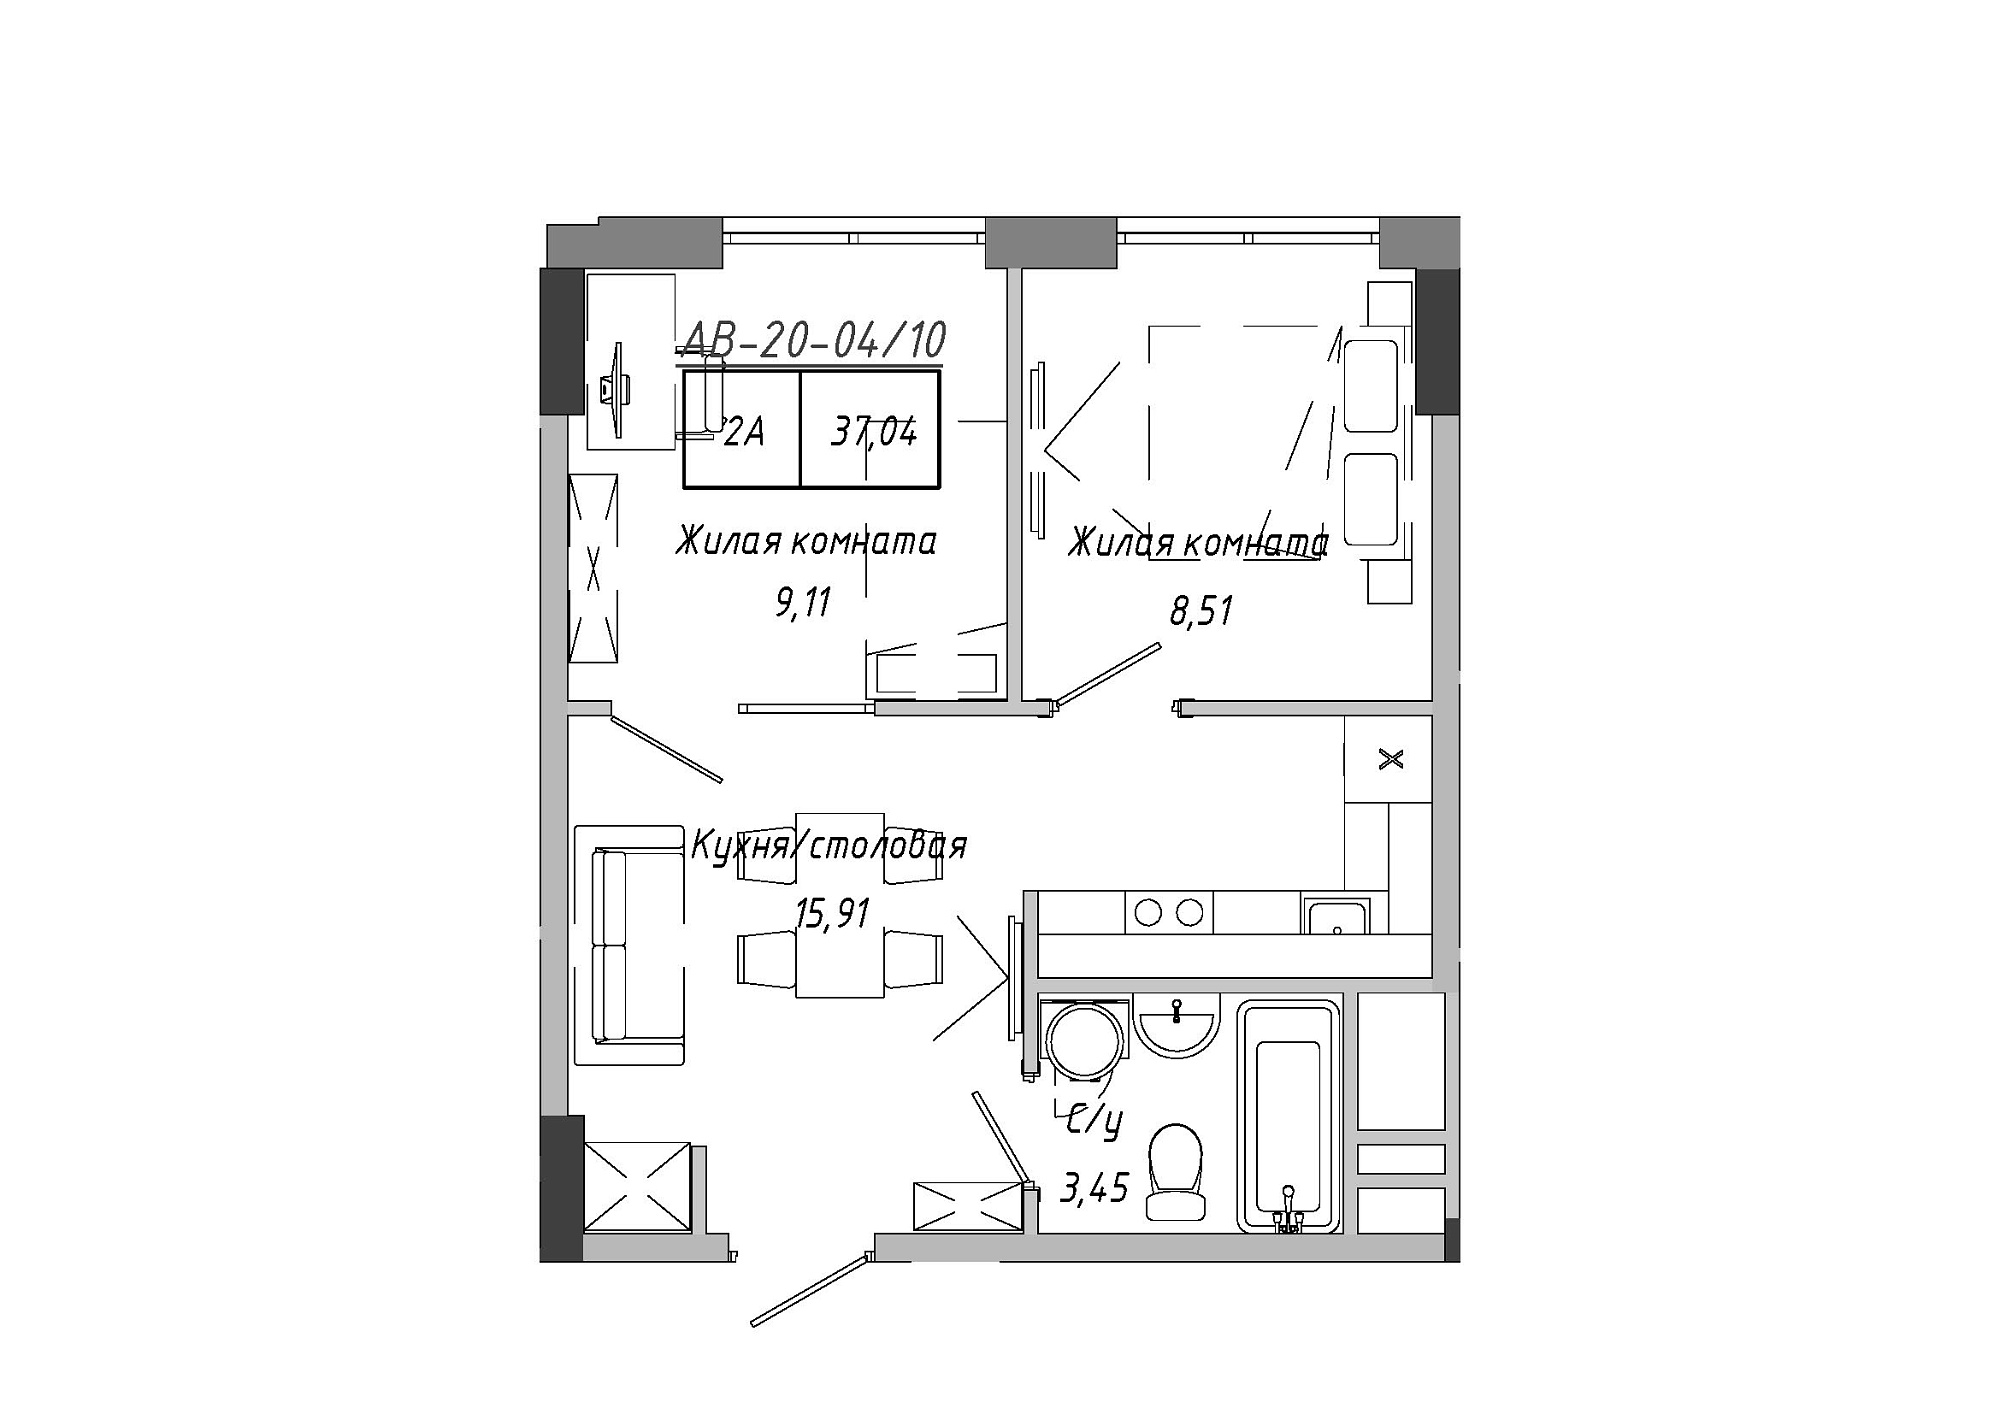 Planning 2-rm flats area 37.04m2, AB-20-04/00010.